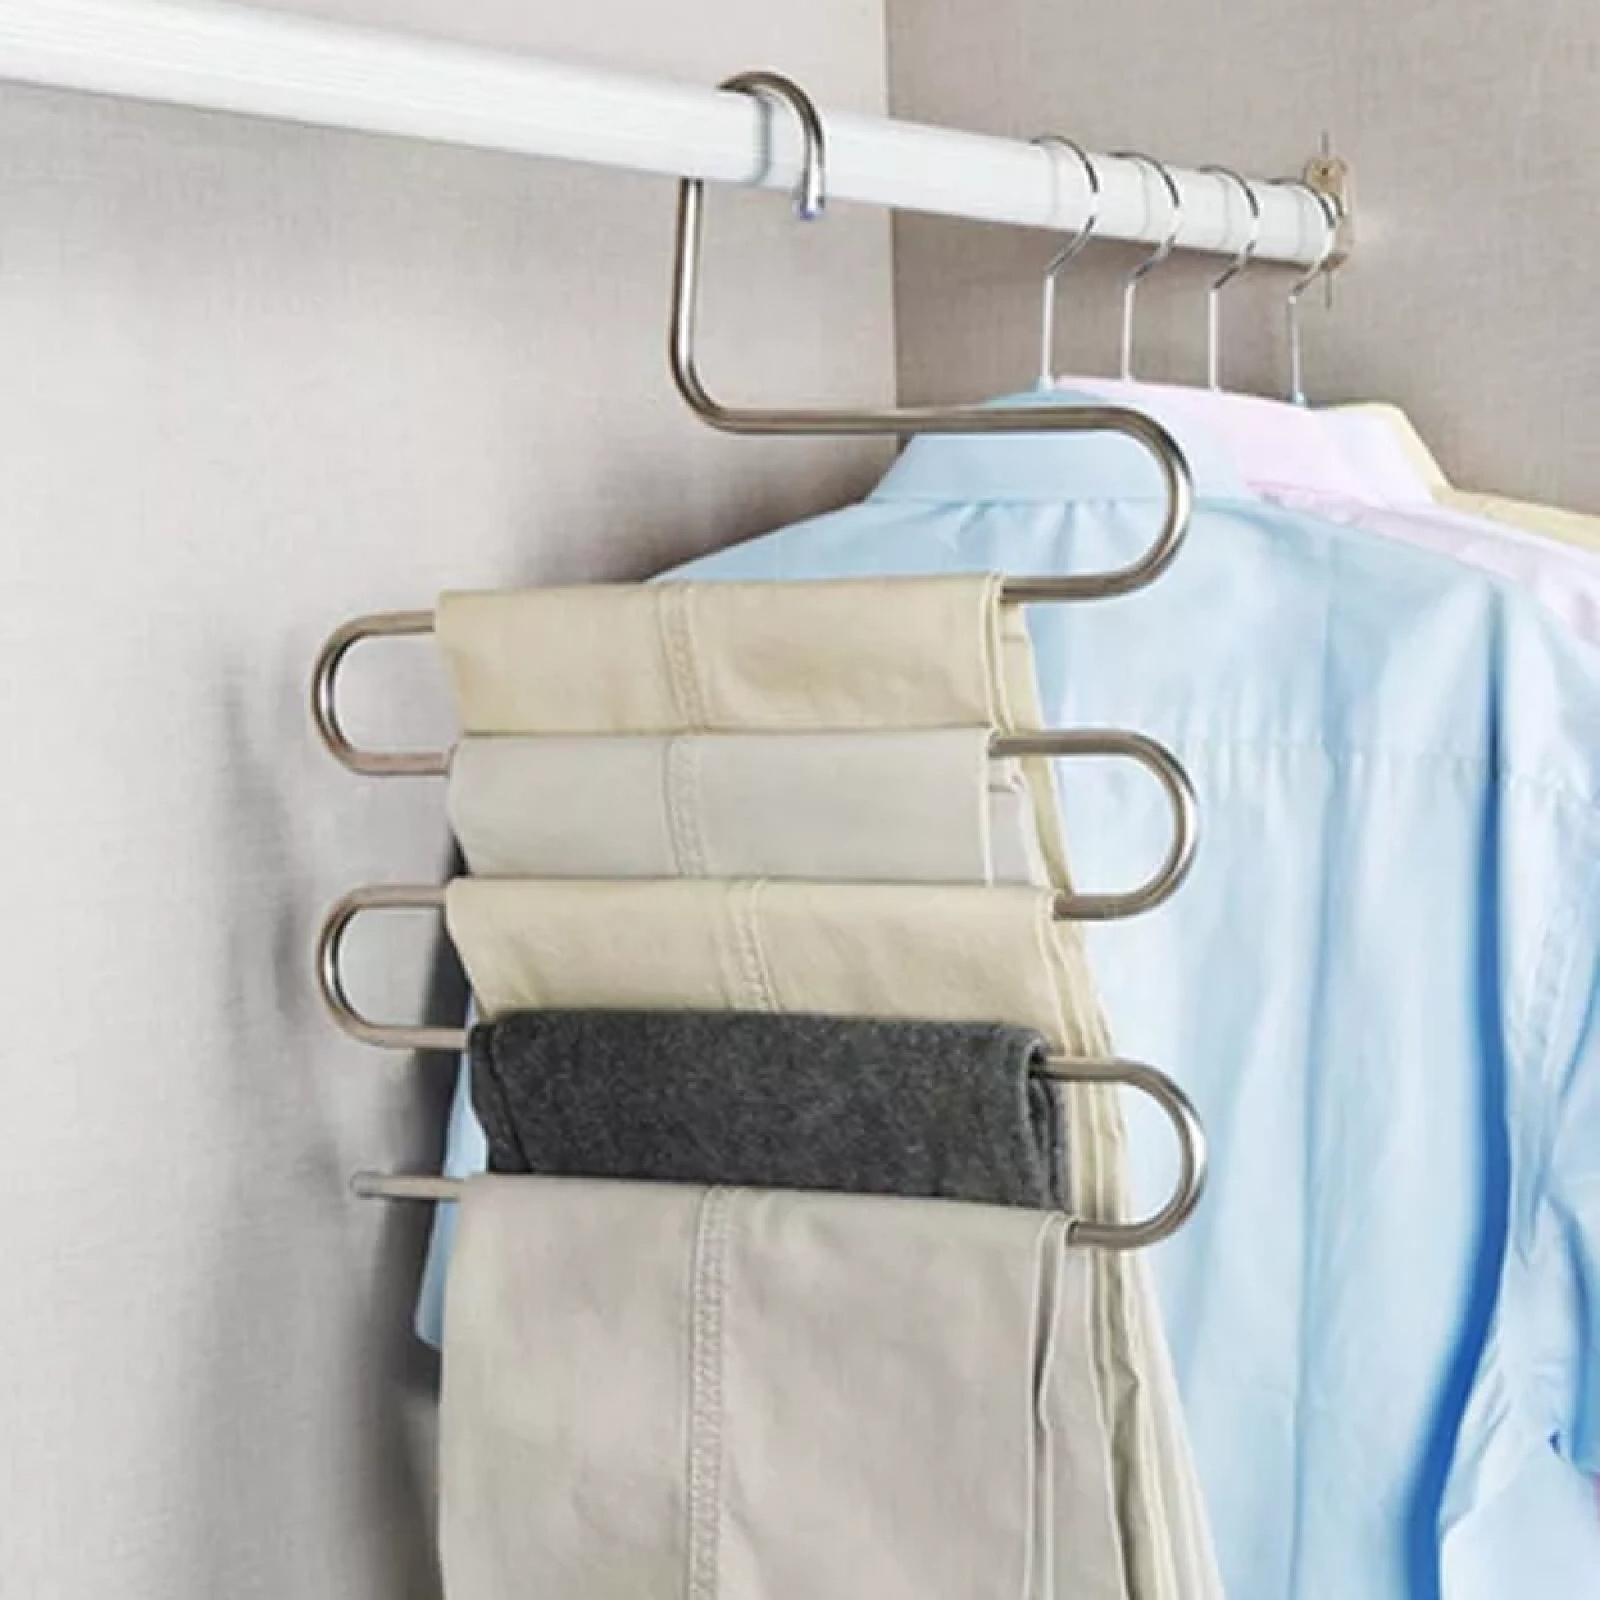 5 Level Pants Hanger-Organizer With Storage Boxes